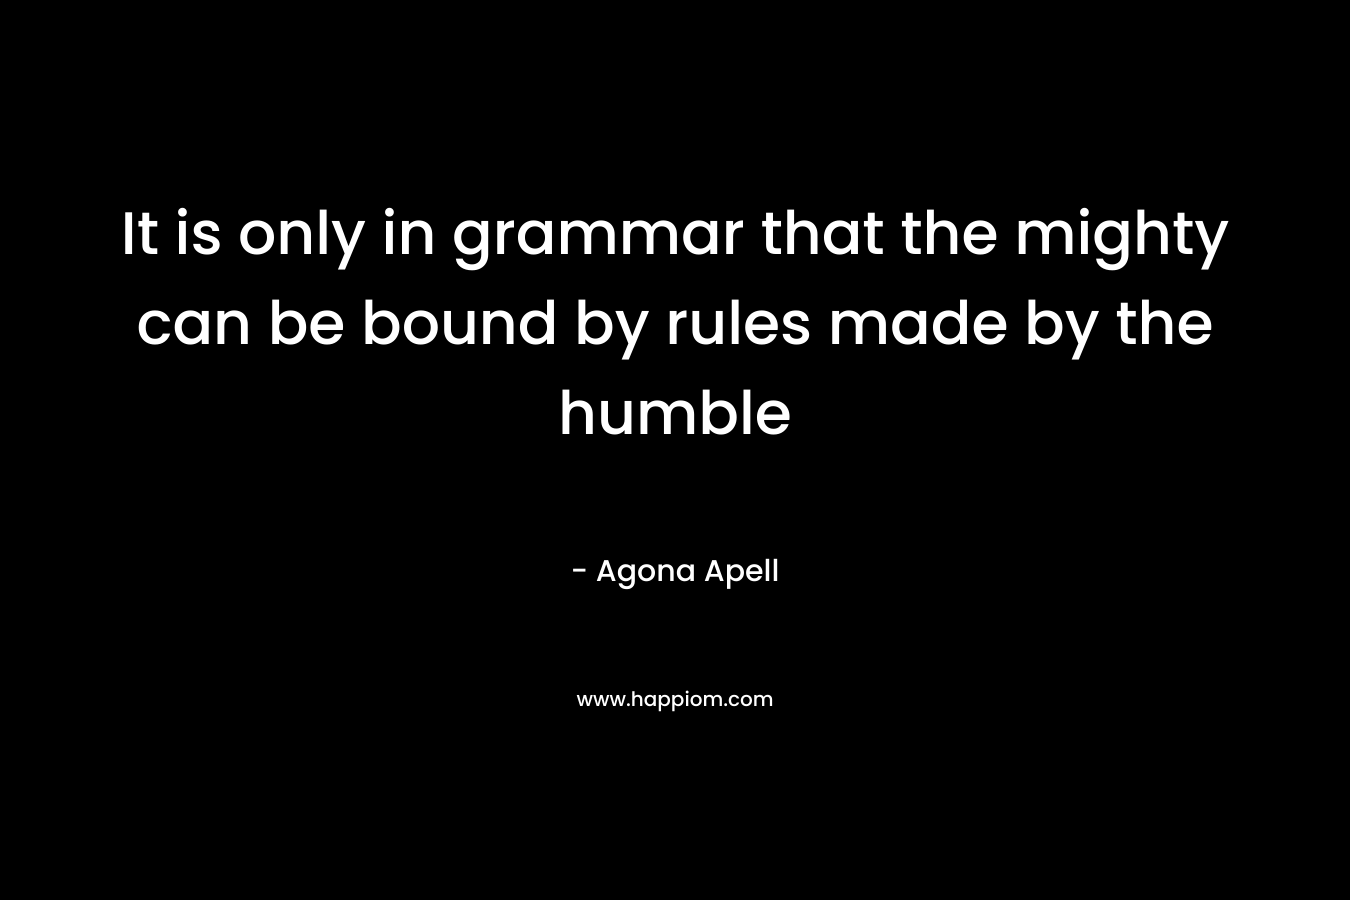 It is only in grammar that the mighty can be bound by rules made by the humble